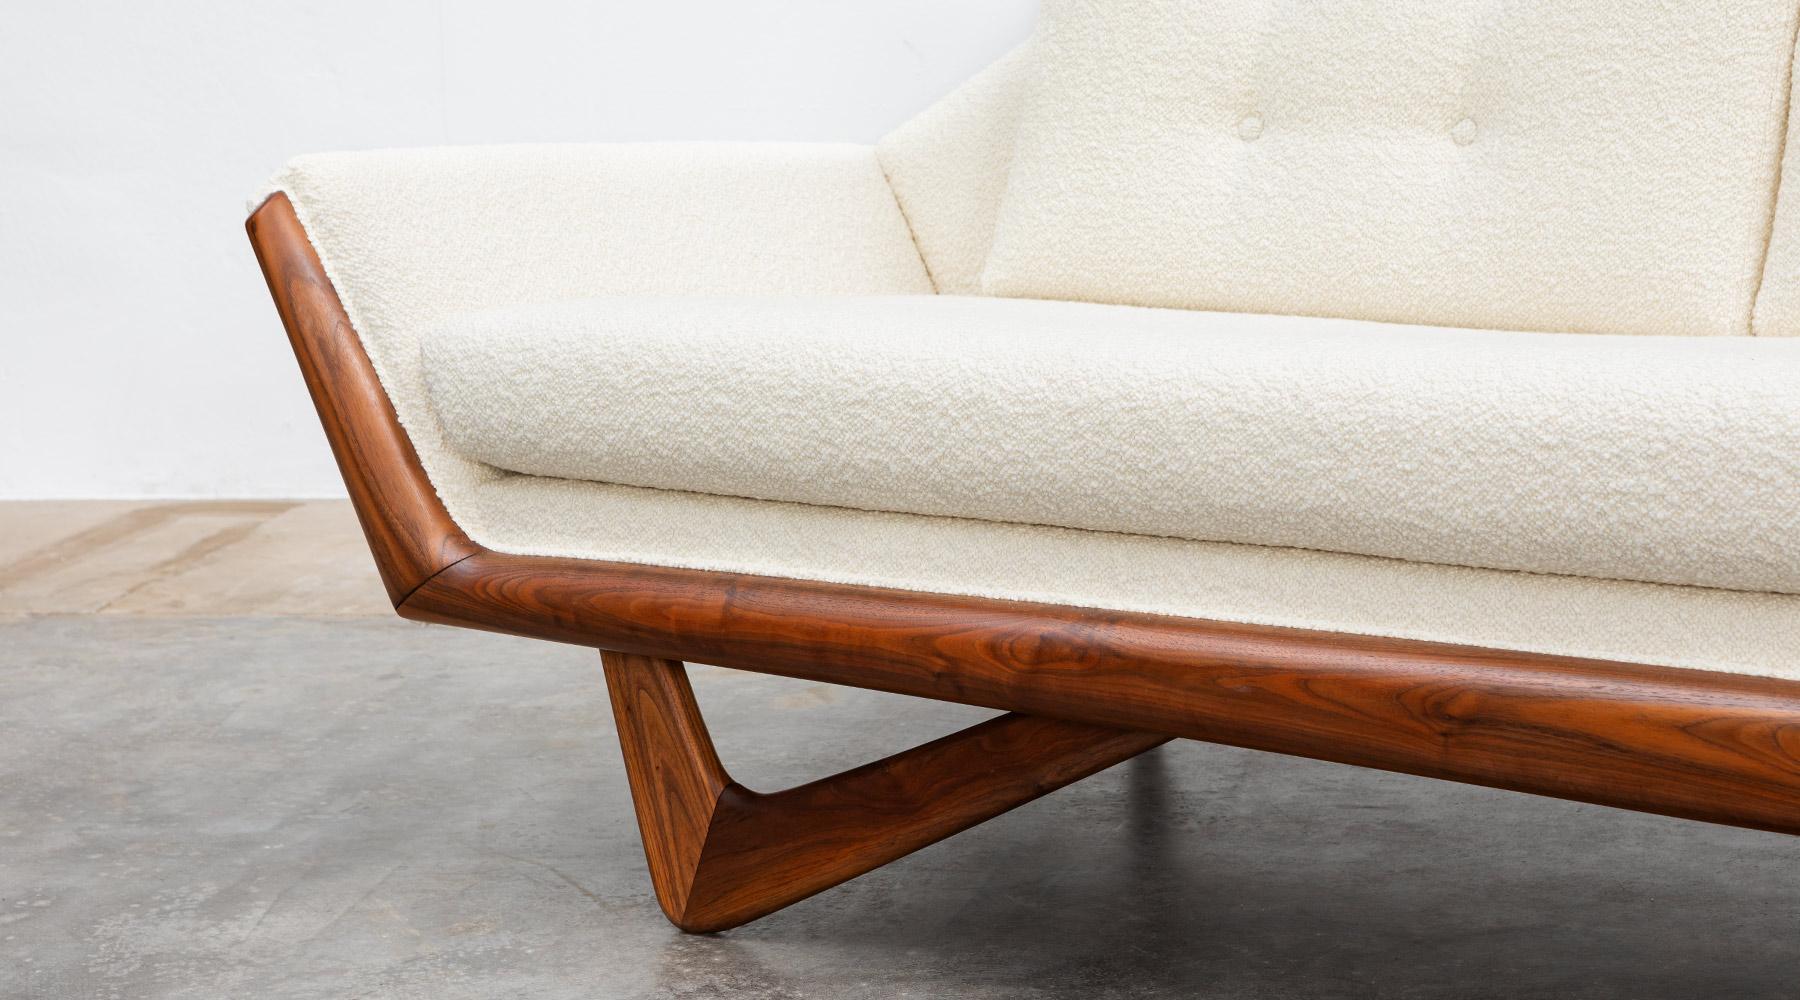 1960s Walnut Base, White Upholstery Sofa by Adrian Pearsall 'B' For Sale 5